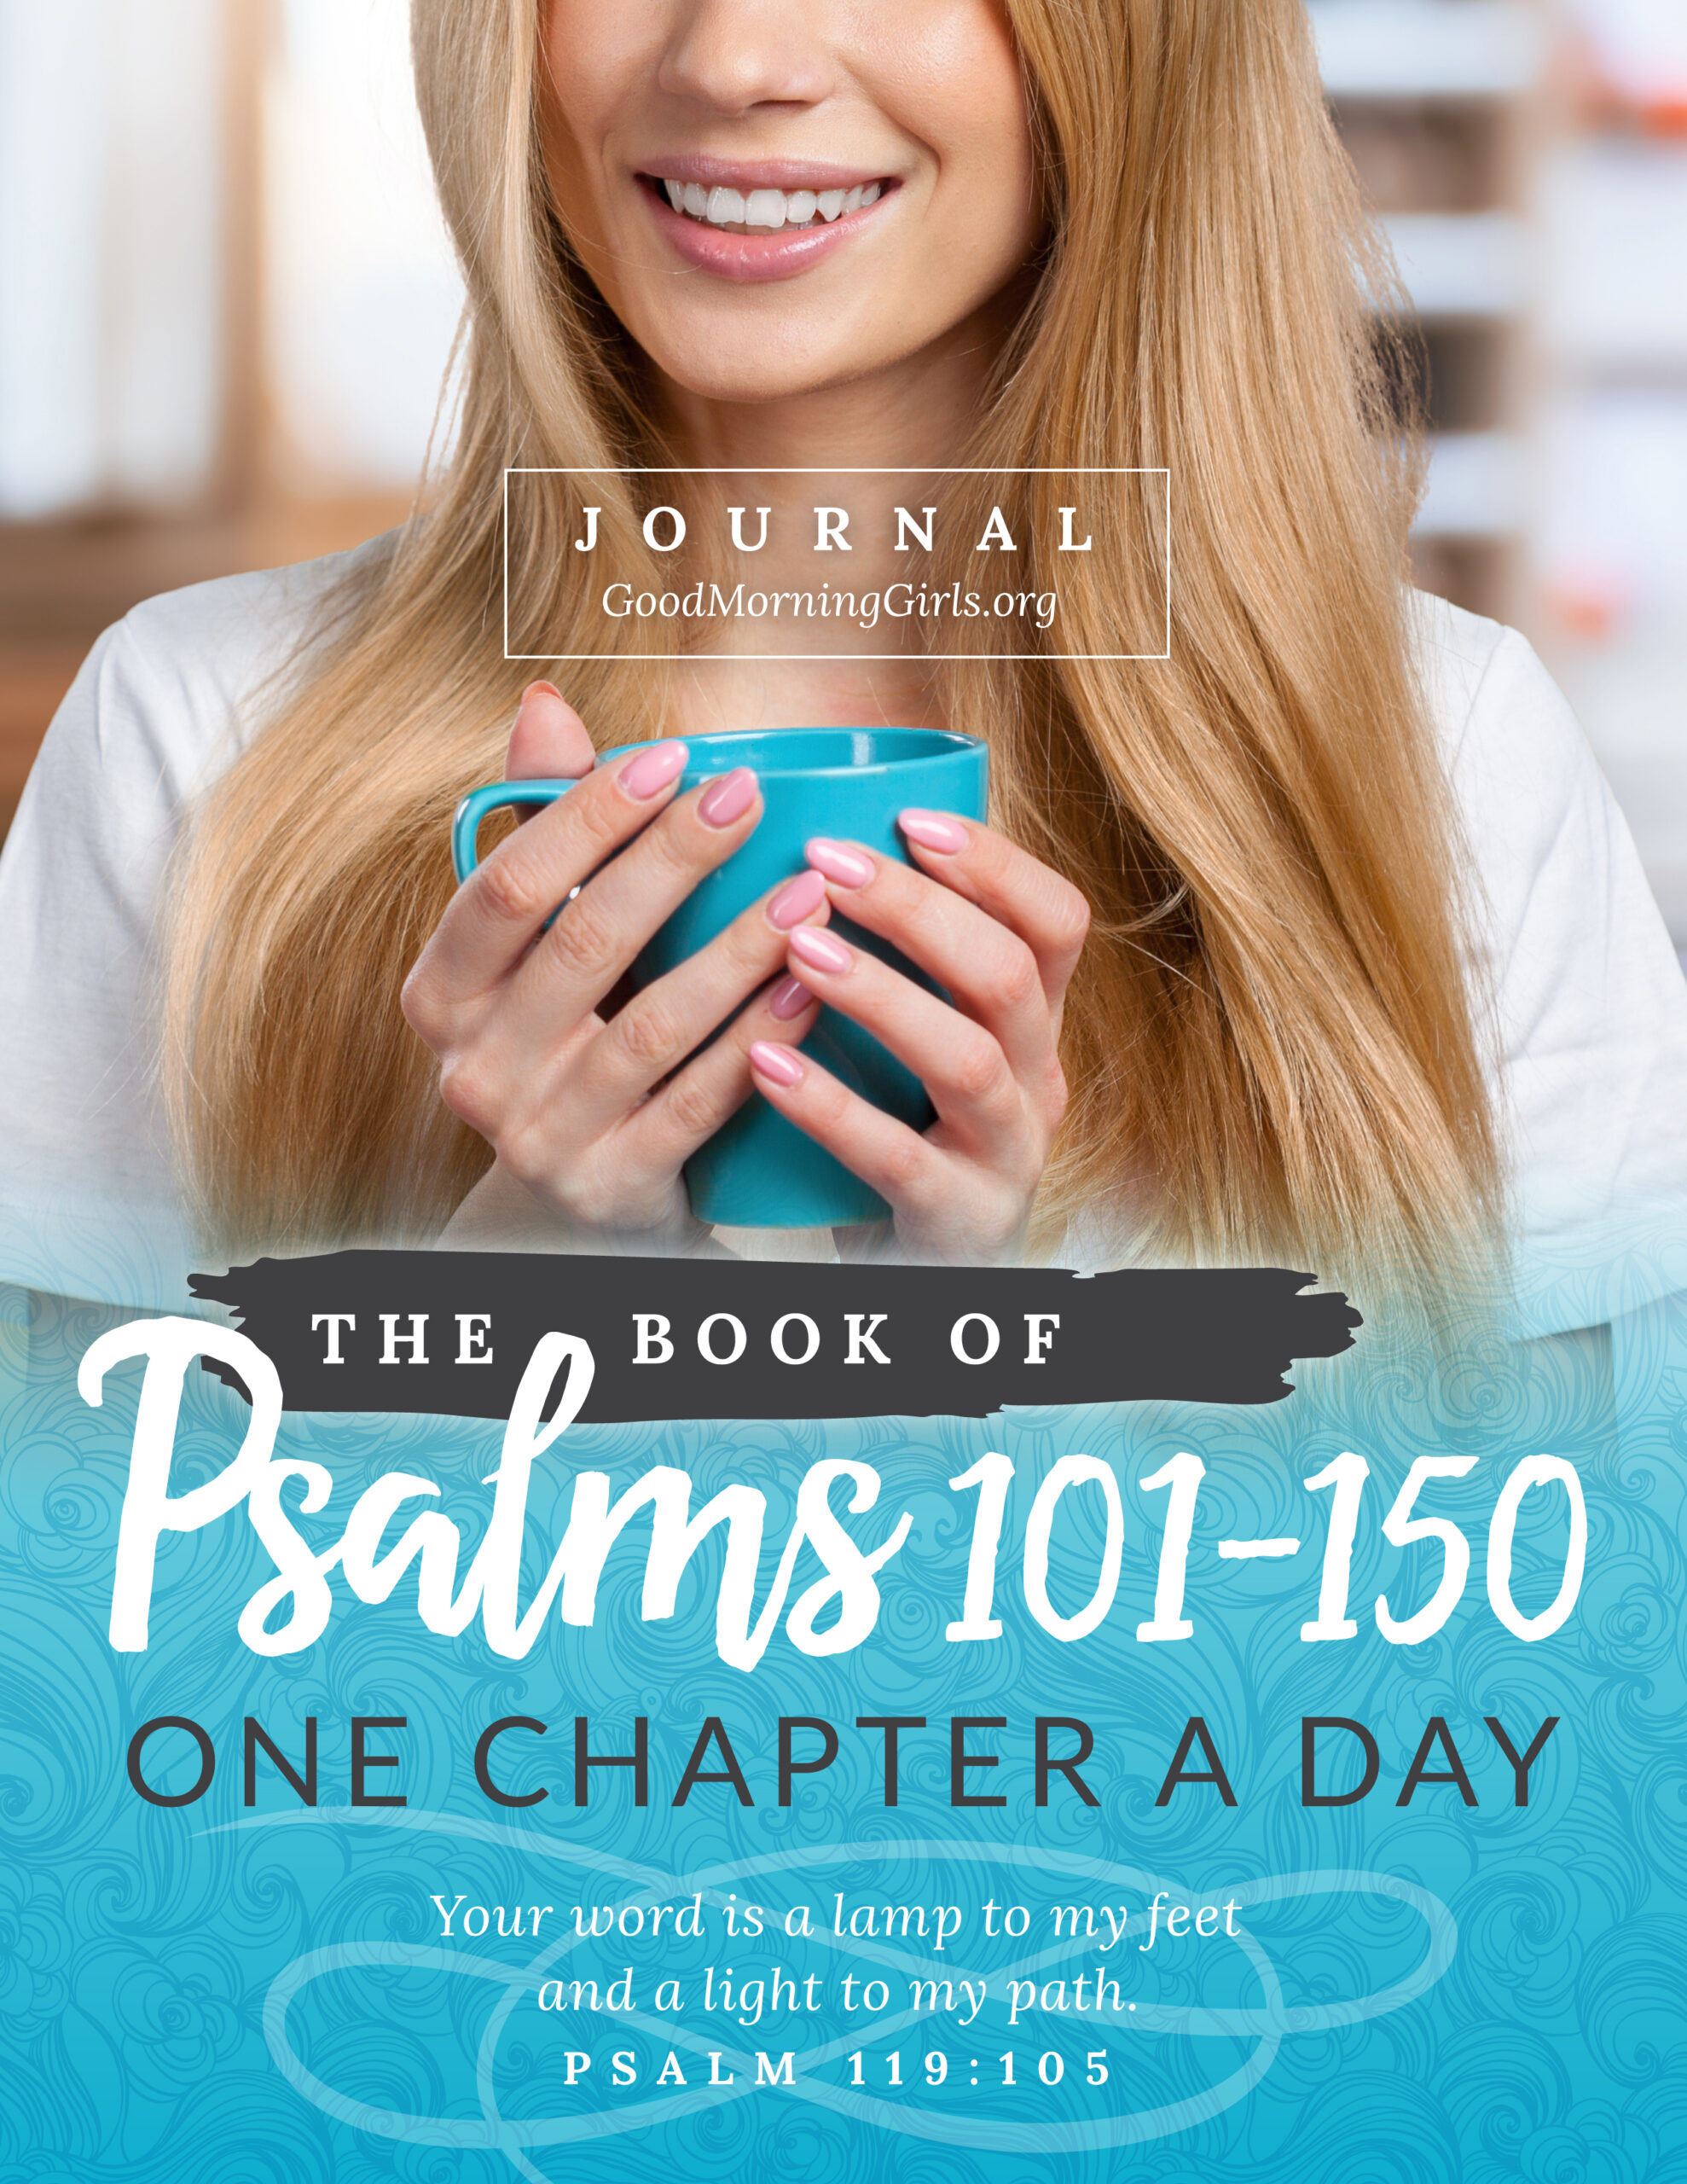 Study Psalms 101-150 with this free online Bible study from Good Morning Girls' and find all of the graphics, blog posts and videos right here! #Biblestudy #Psalms #WomensBibleStudy #GoodMorningGirls